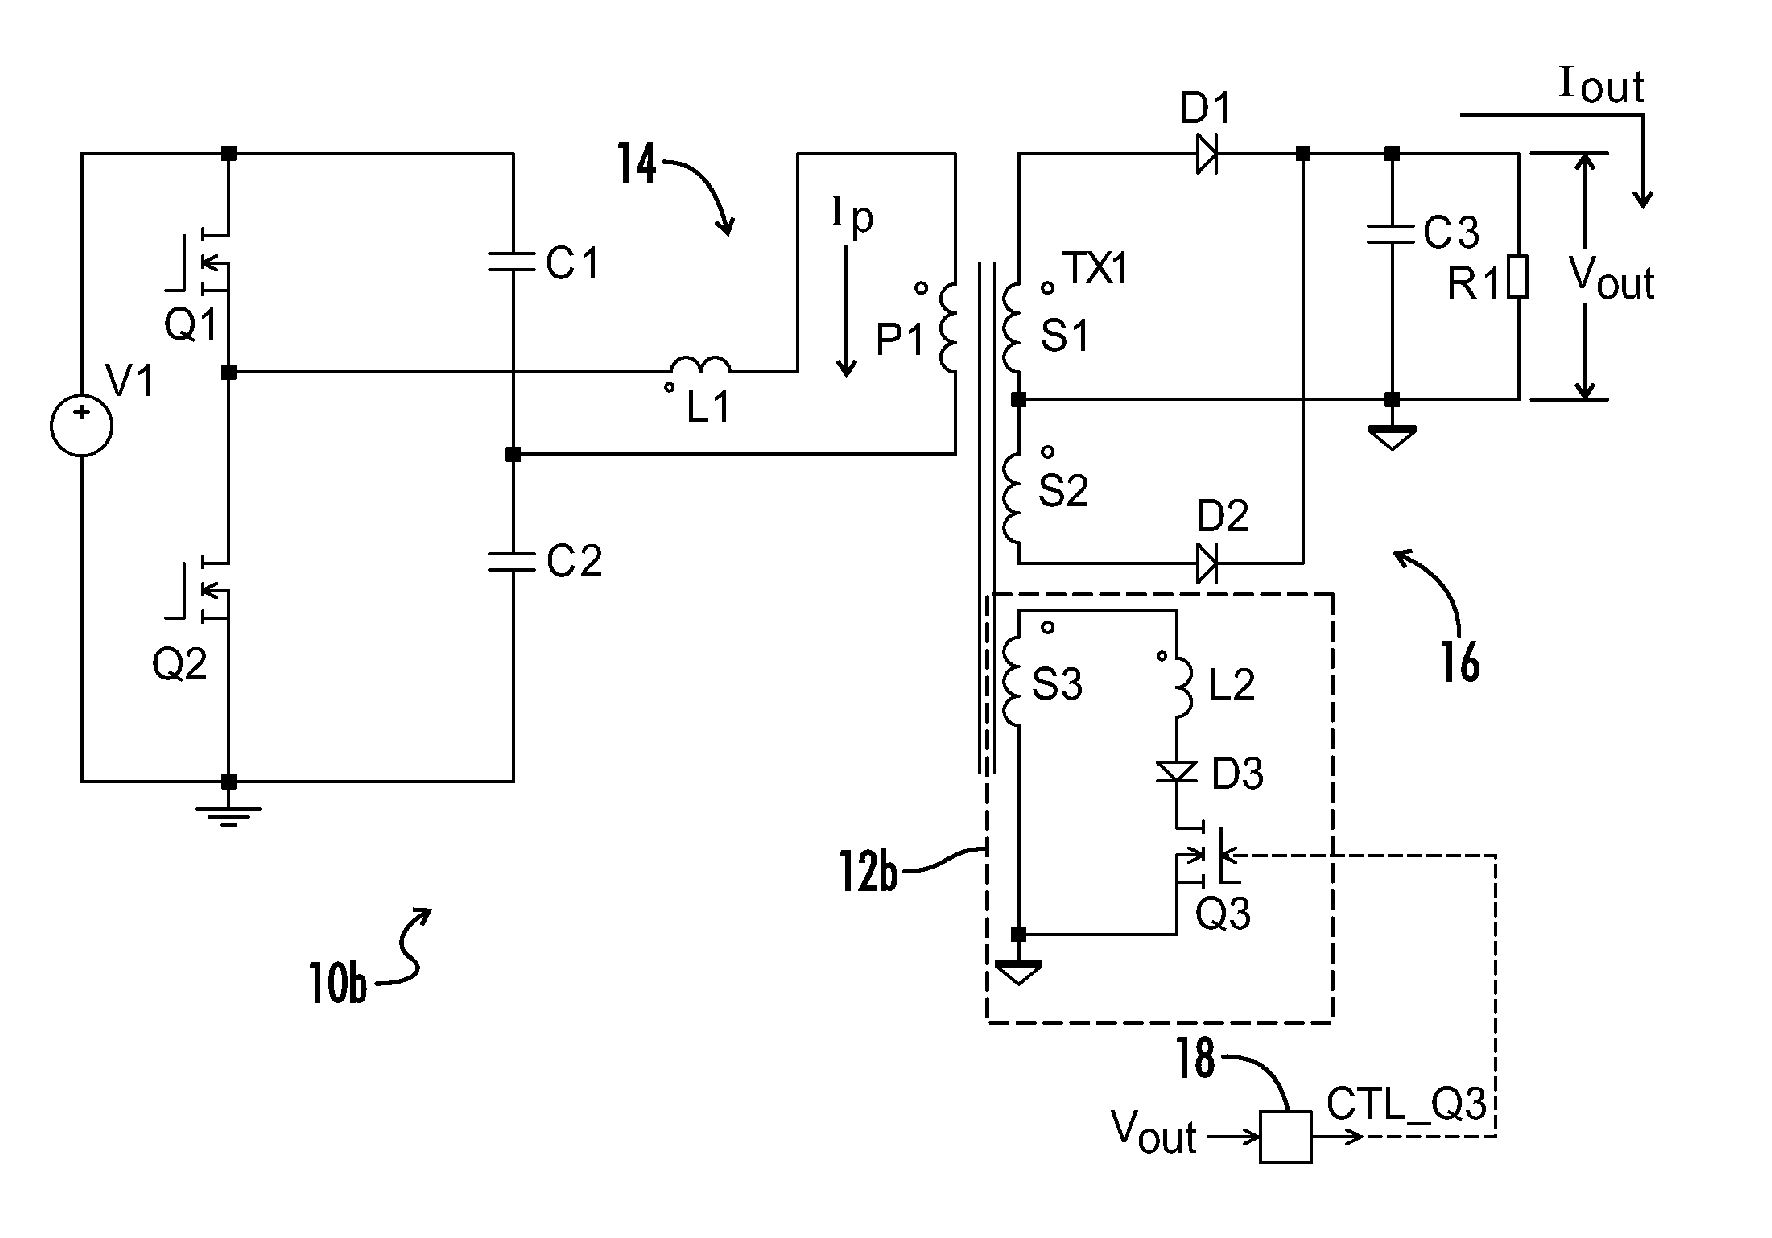 Hold-up time enhancement circuit for llc resonant converter